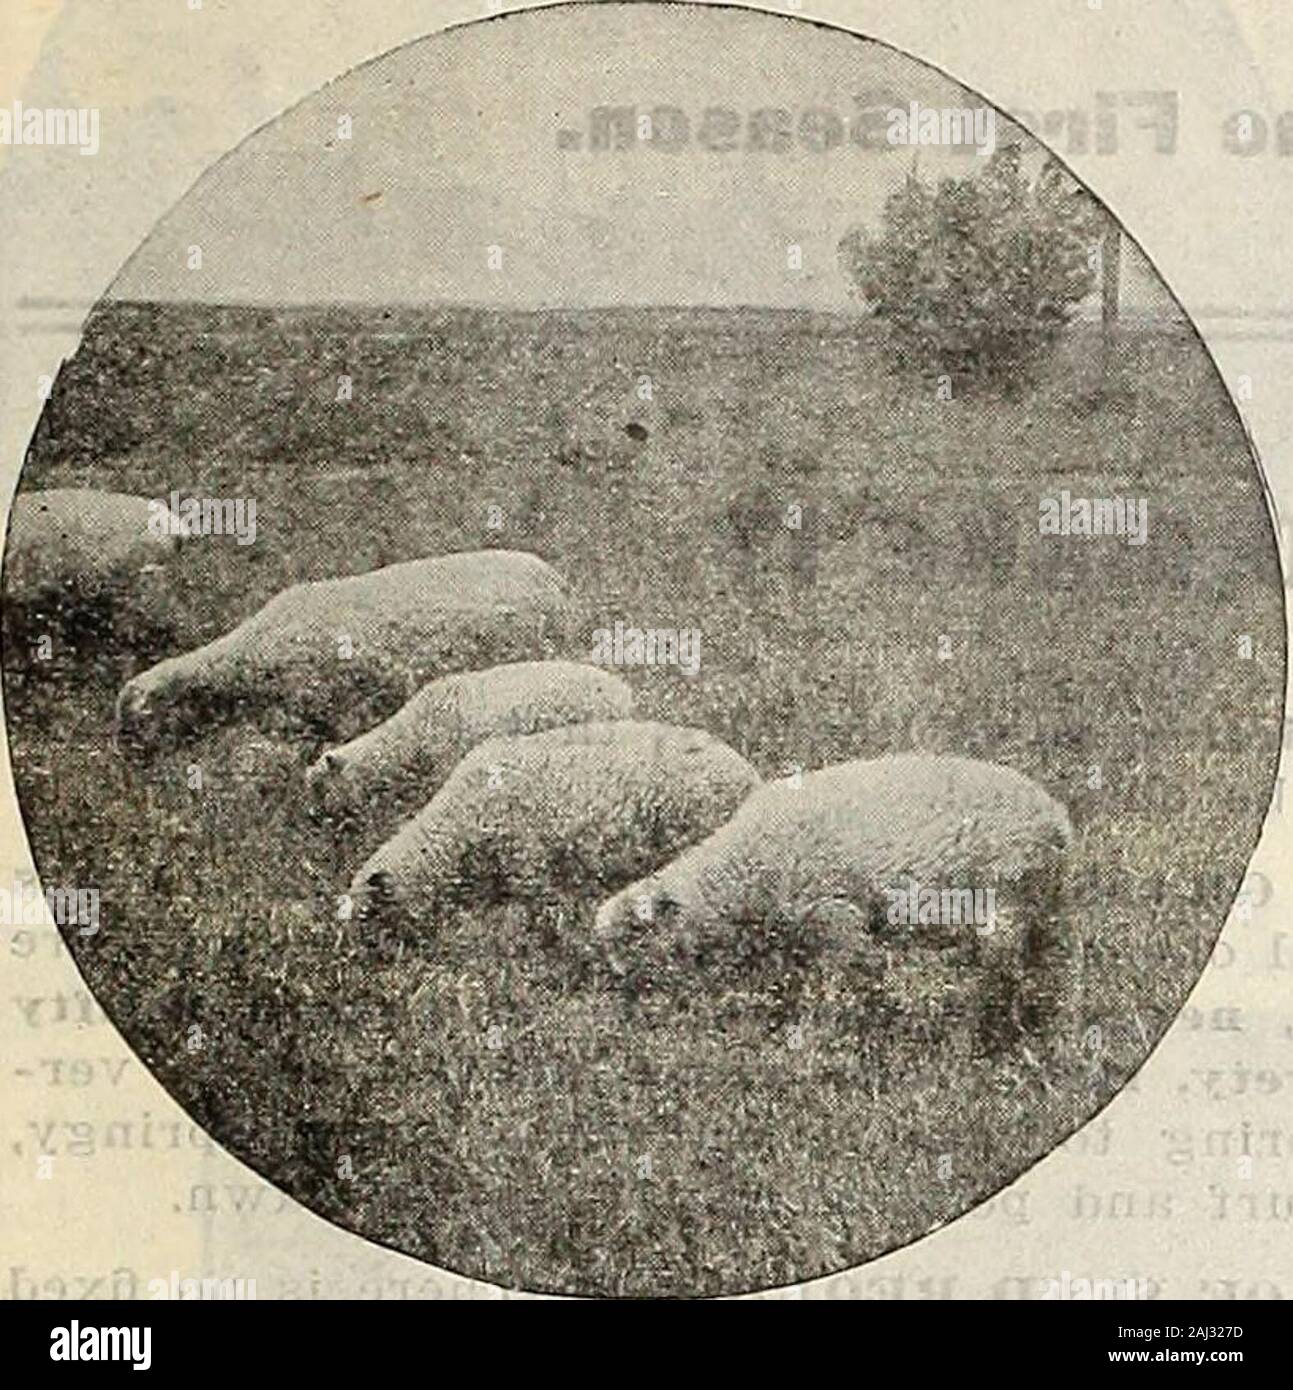 Farm and garden annual : spring 1907 . uriant pasturage from July to the endof October. Tall Oat Grass, Sheeps Fescue, Meado-w Fescue, Timothy, English Rye Grass, Red Clover,Italian Rve Grass, Alsike Clover,Orchard Grass, White Clover, Sow 20 lbs. per acre.Cost per acre. .$2.25 .50 lb. lots 5.25 100 lb. lots 10.00 No. 4. Hog Pasture Grass and Clover Mixture. This mixture is composed of varieties that will give thequickest and best results. A sowing made in the early springwill furnish a grand and luxuriant pasture by July of the sameyear. No hog raiser should be without an acre or two of this. Stock Photo